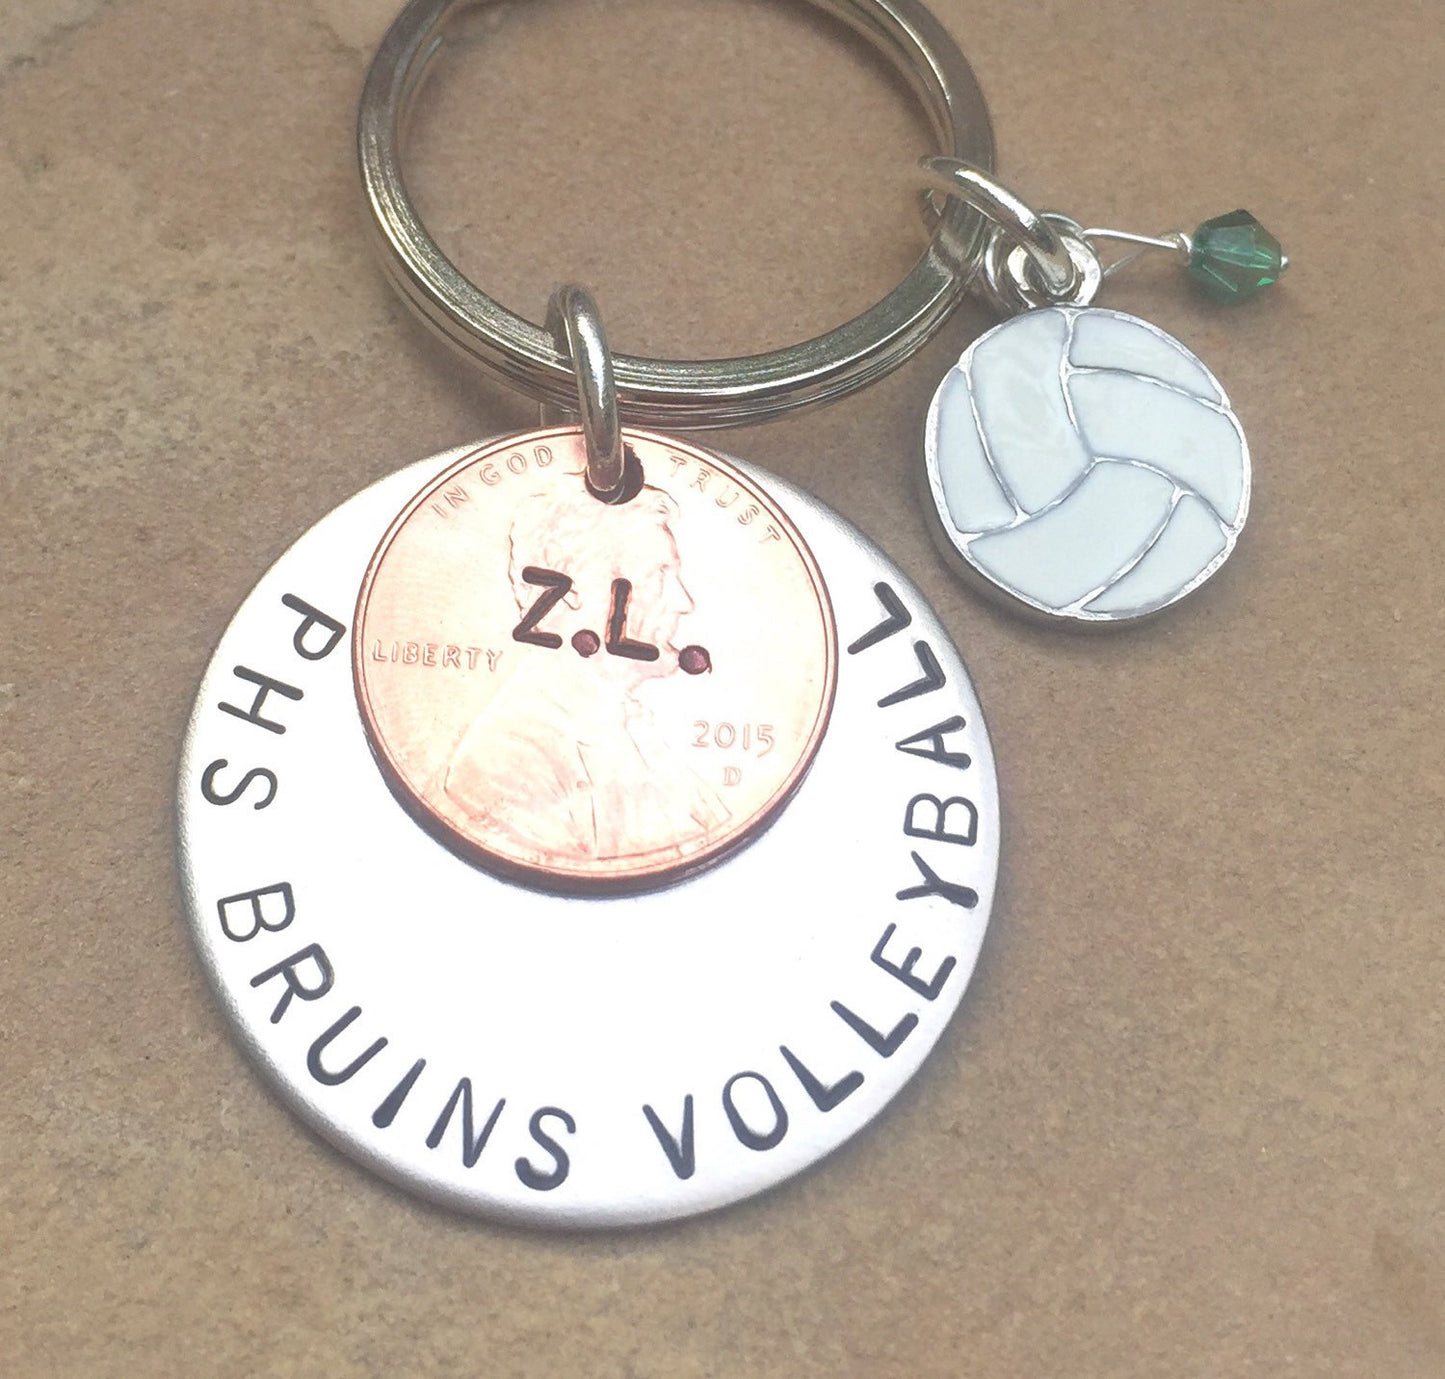 Soccer Keychain, Boyfriend Gift, Personalized Sports Gift, Hand Stamped Keychain,High School Gift, College Gifts, Christmas G - Natashaaloha, jewelry, bracelets, necklace, keychains, fishing lures, gifts for men, charms, personalized, 